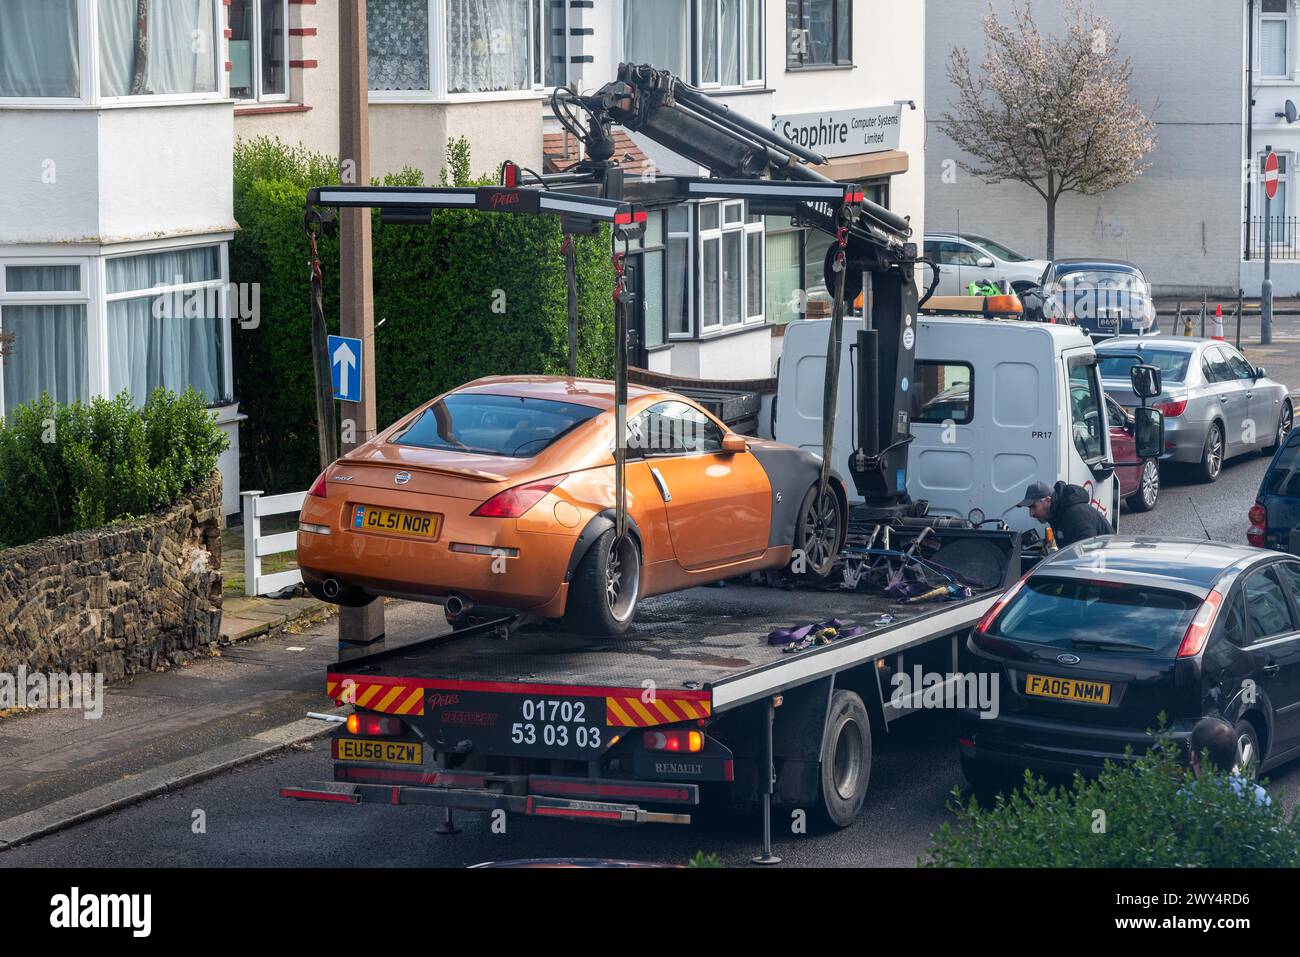 Damaged car being recovered by a breakdown truck in a confined narrow street, Essex, UK Stock Photo